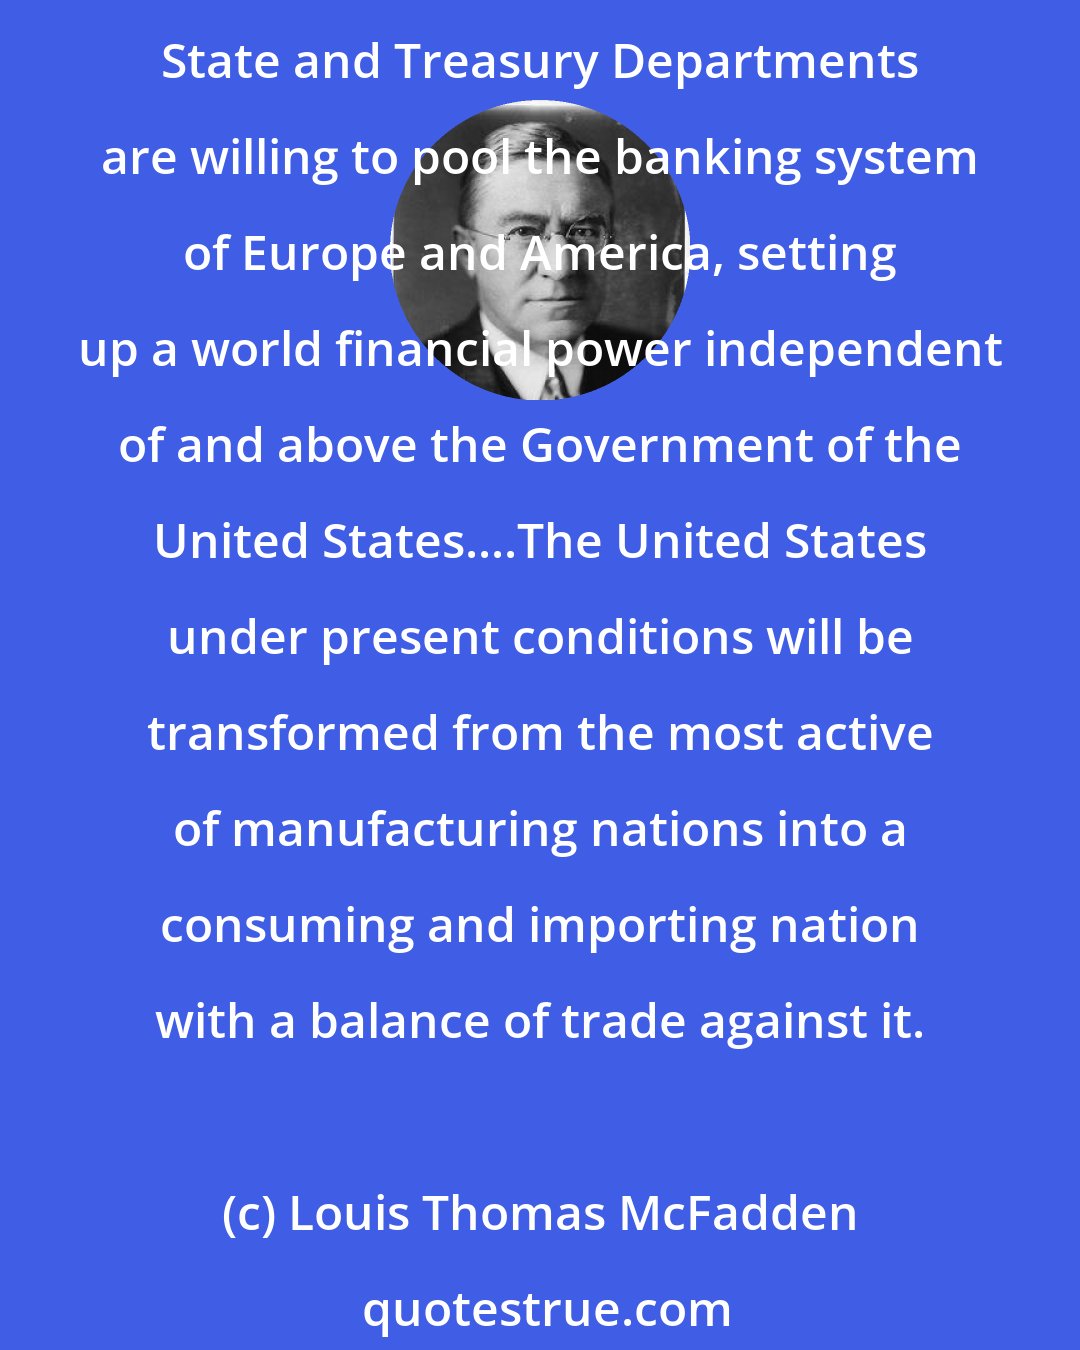 Louis Thomas McFadden: The Federal Reserve Bank of New York is eager to enter into close relationship with the Bank for International Settlements....The conclusion is impossible to escape that the State and Treasury Departments are willing to pool the banking system of Europe and America, setting up a world financial power independent of and above the Government of the United States....The United States under present conditions will be transformed from the most active of manufacturing nations into a consuming and importing nation with a balance of trade against it.